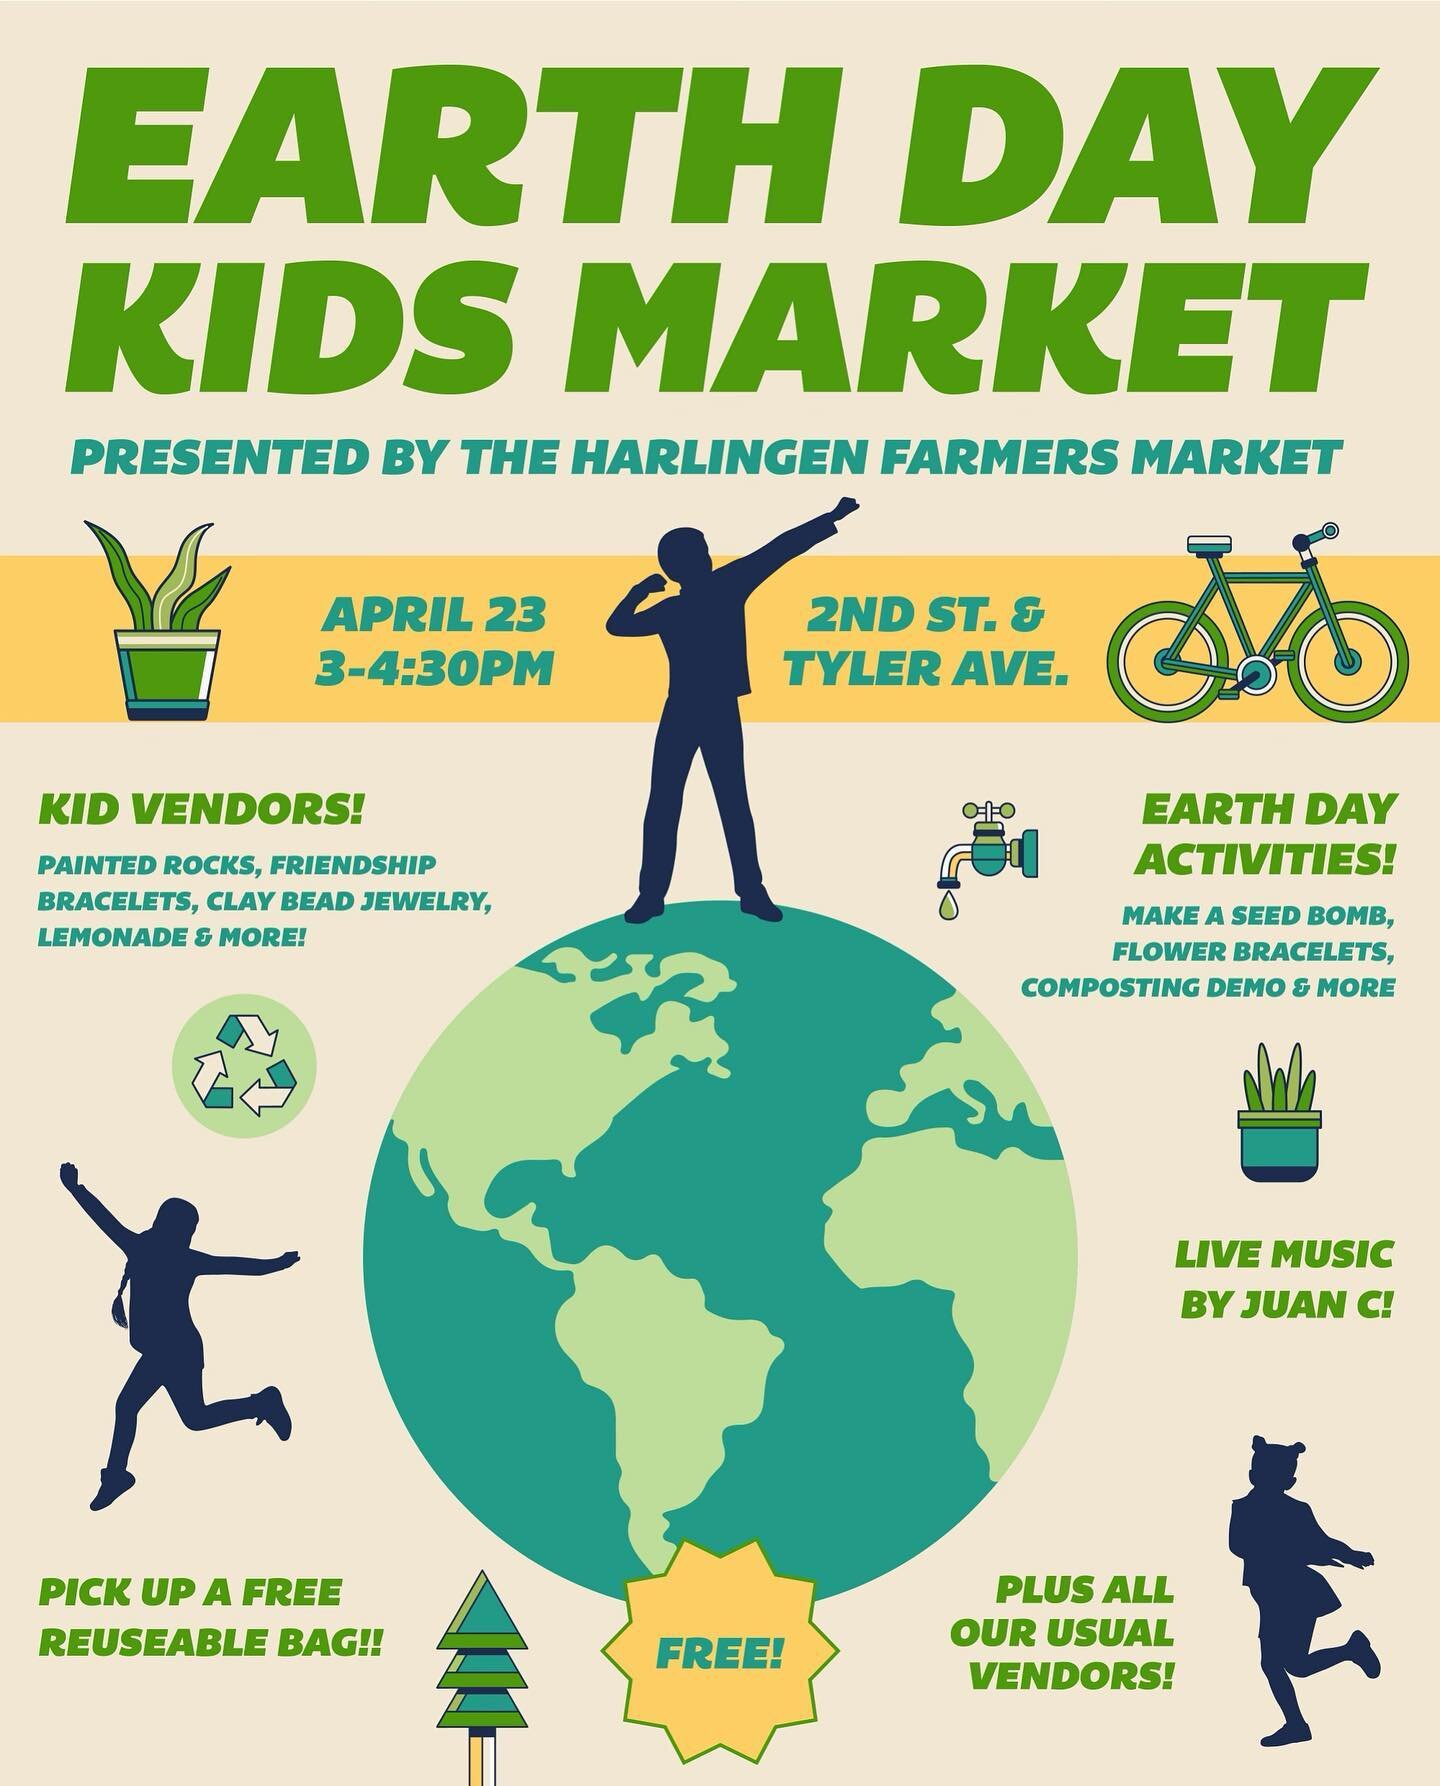 Get ready for an Earth Day Kids Market! 
We love providing the opportunity for these kids to show us their passion, and creativity! 
Join us for a compost demonstration, kids activities, young entrepreneurs, live music by Juan C., and of course our a